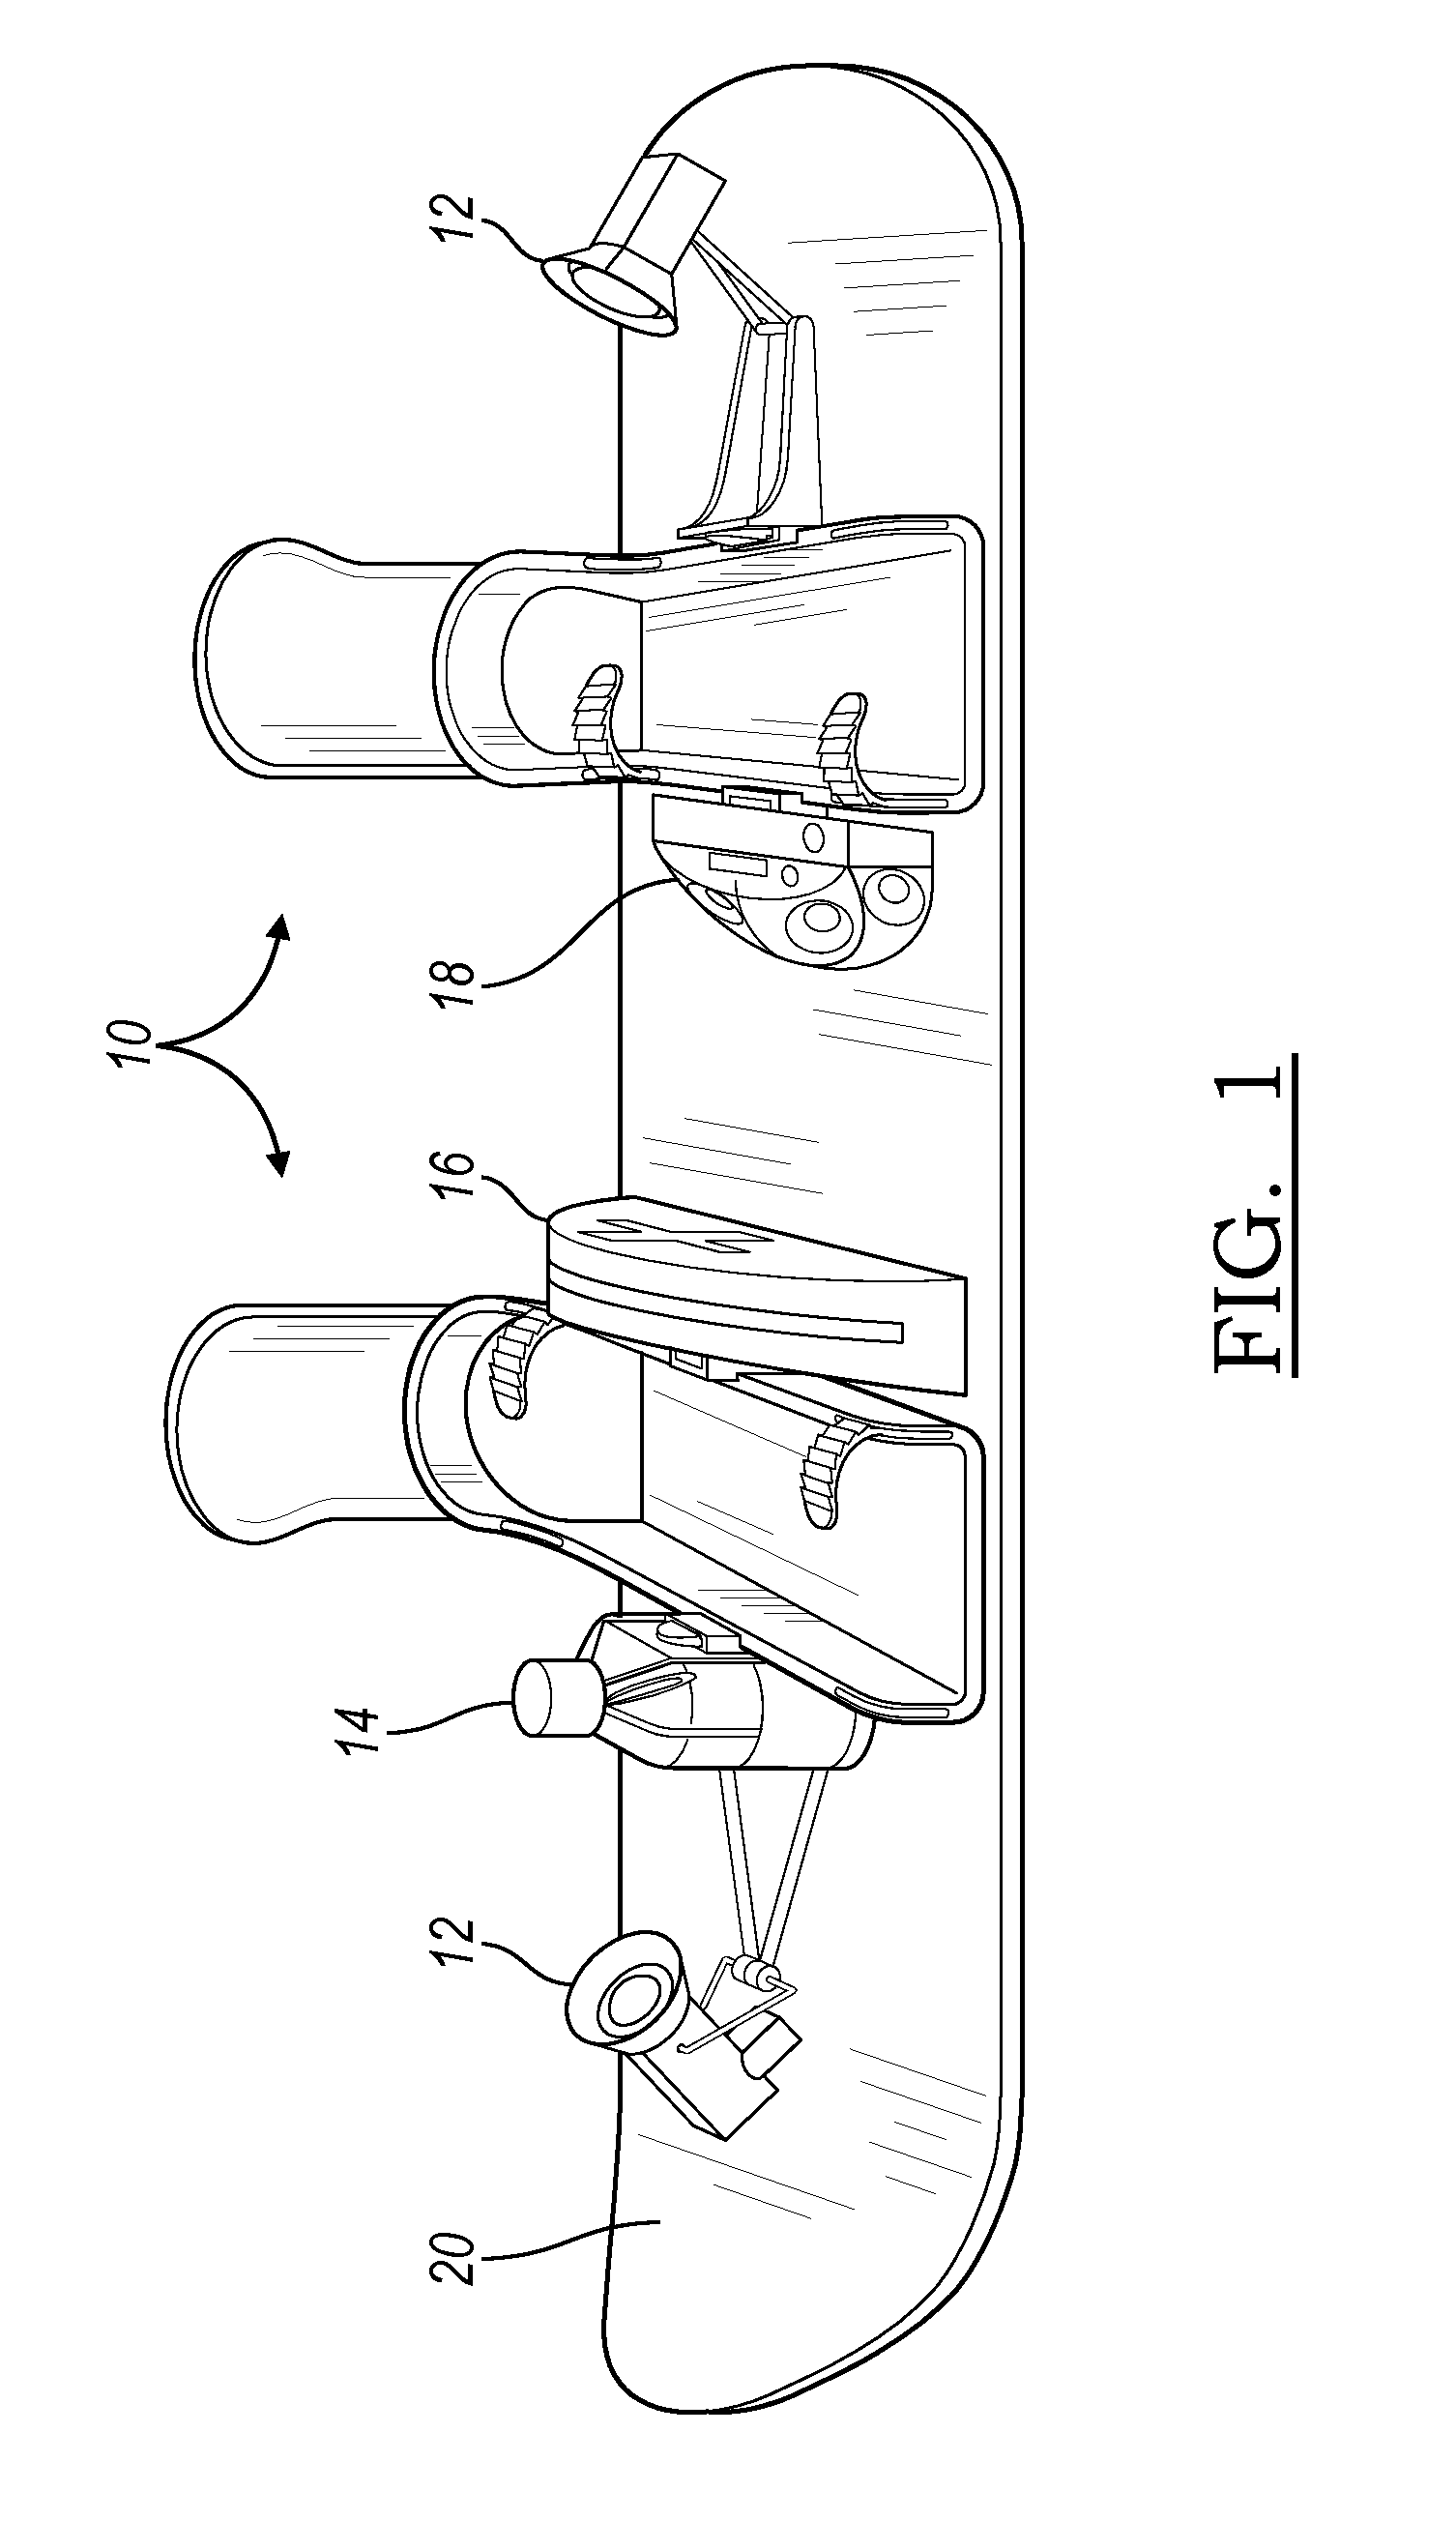 Tool-less manual quick release snowboard-mounted interface binding system via a snowboard binding